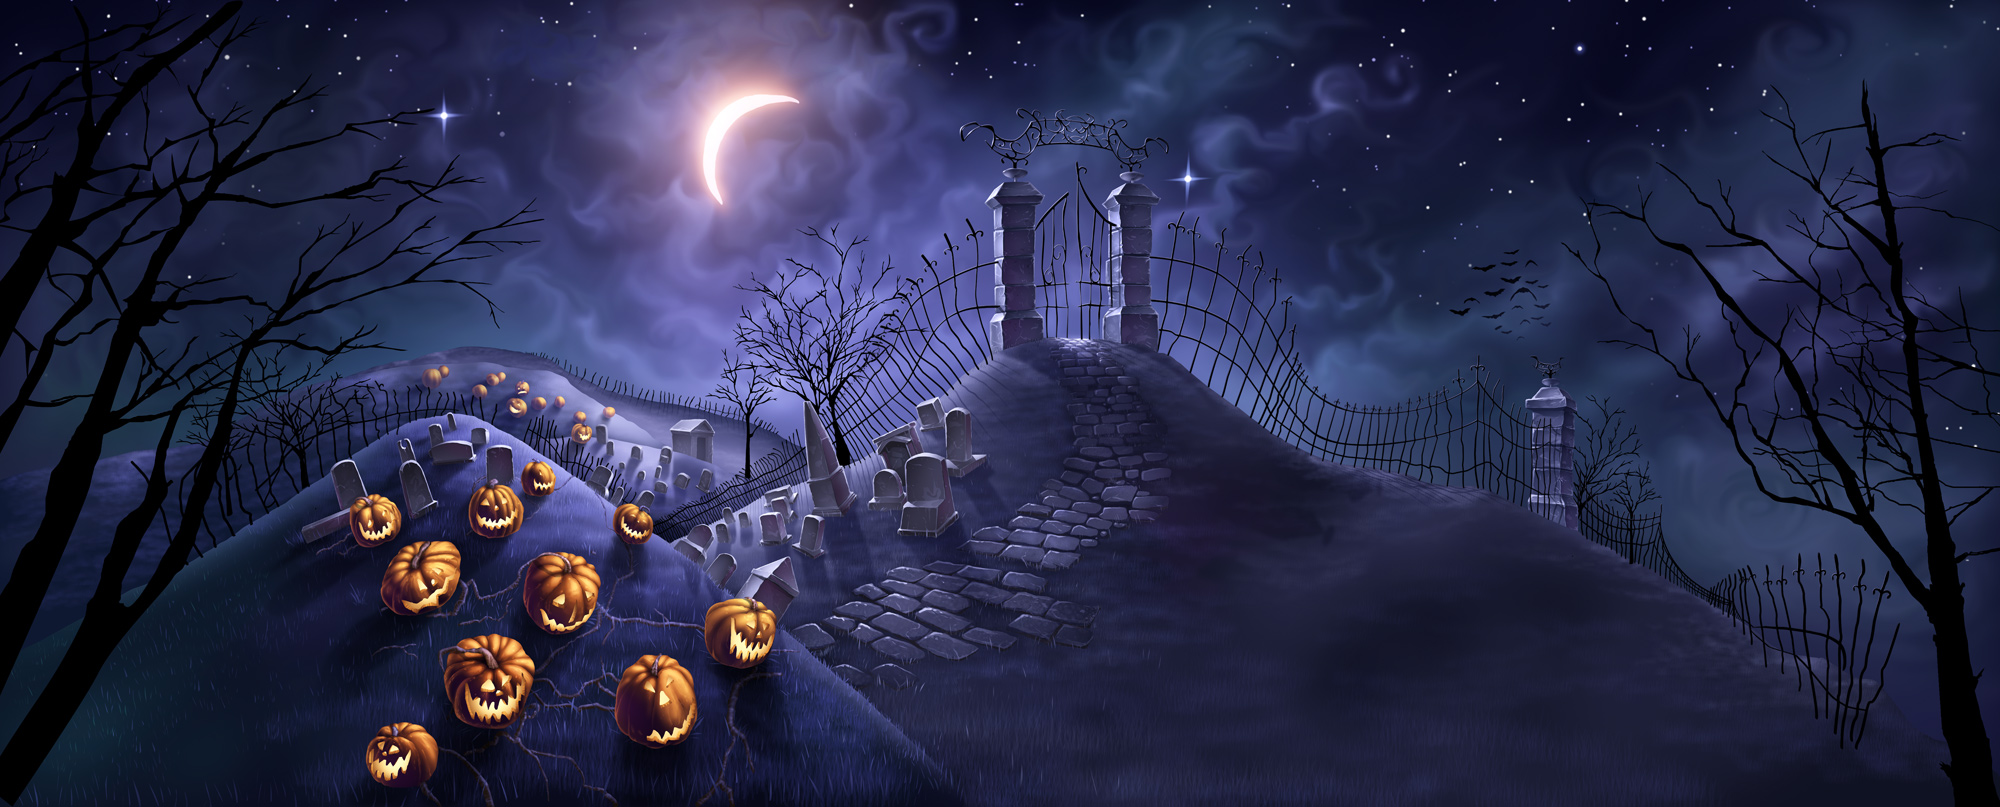 Backgrounds Scary Halloween  Design